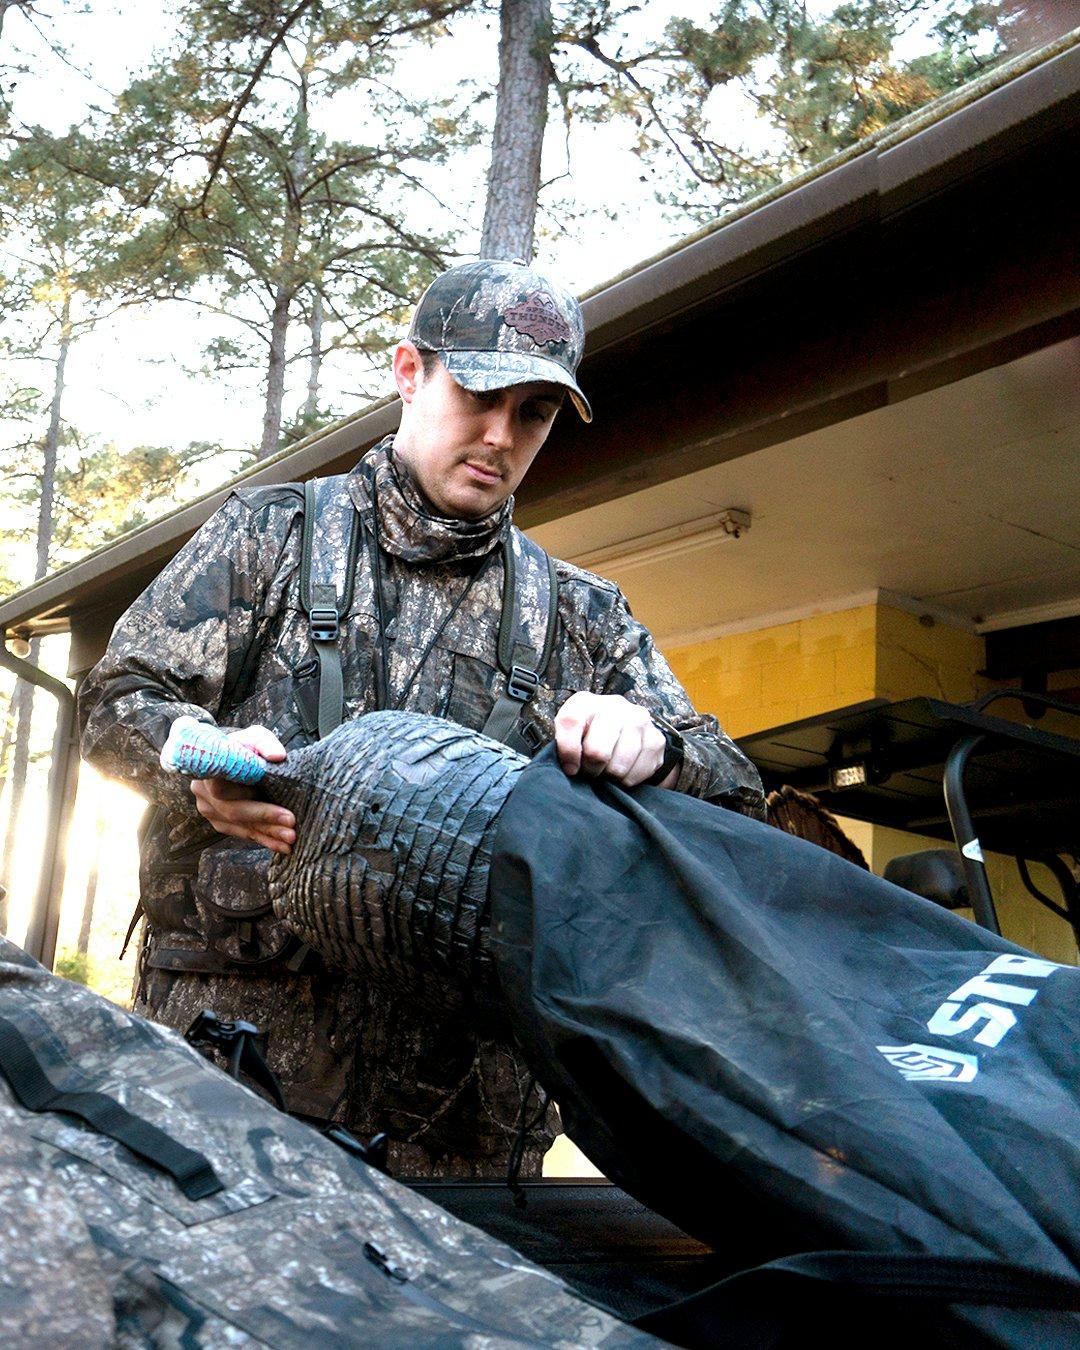 Realtree's Tyler Jordan loads a decoy into his four-wheeler before the hunt. Image by Realtree/Tyler Jordan